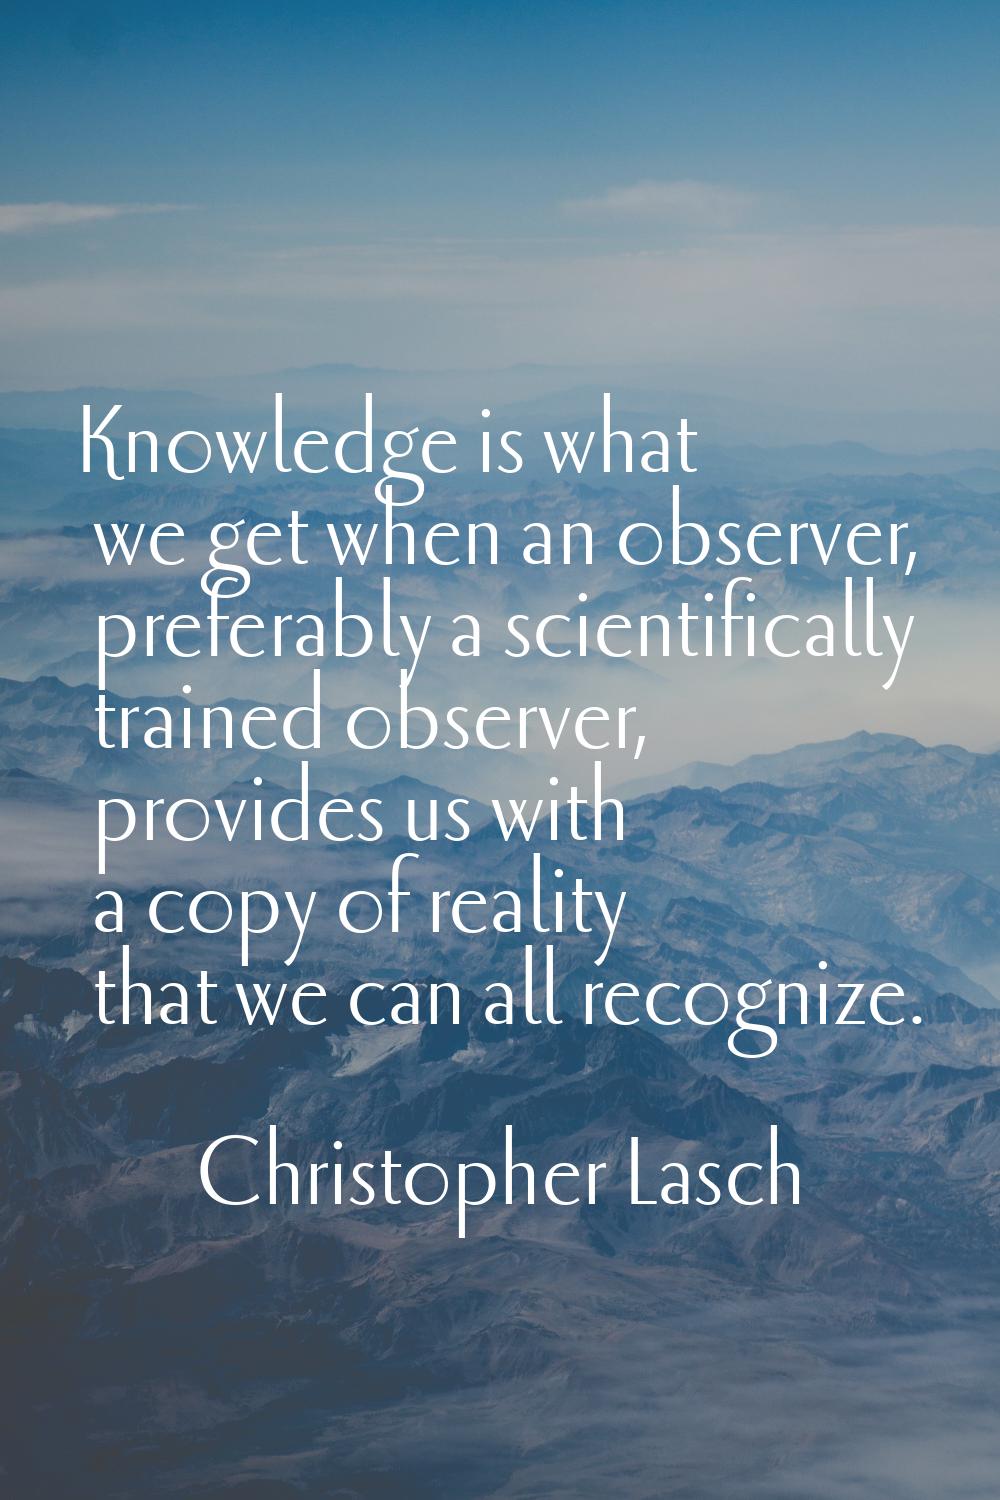 Knowledge is what we get when an observer, preferably a scientifically trained observer, provides u